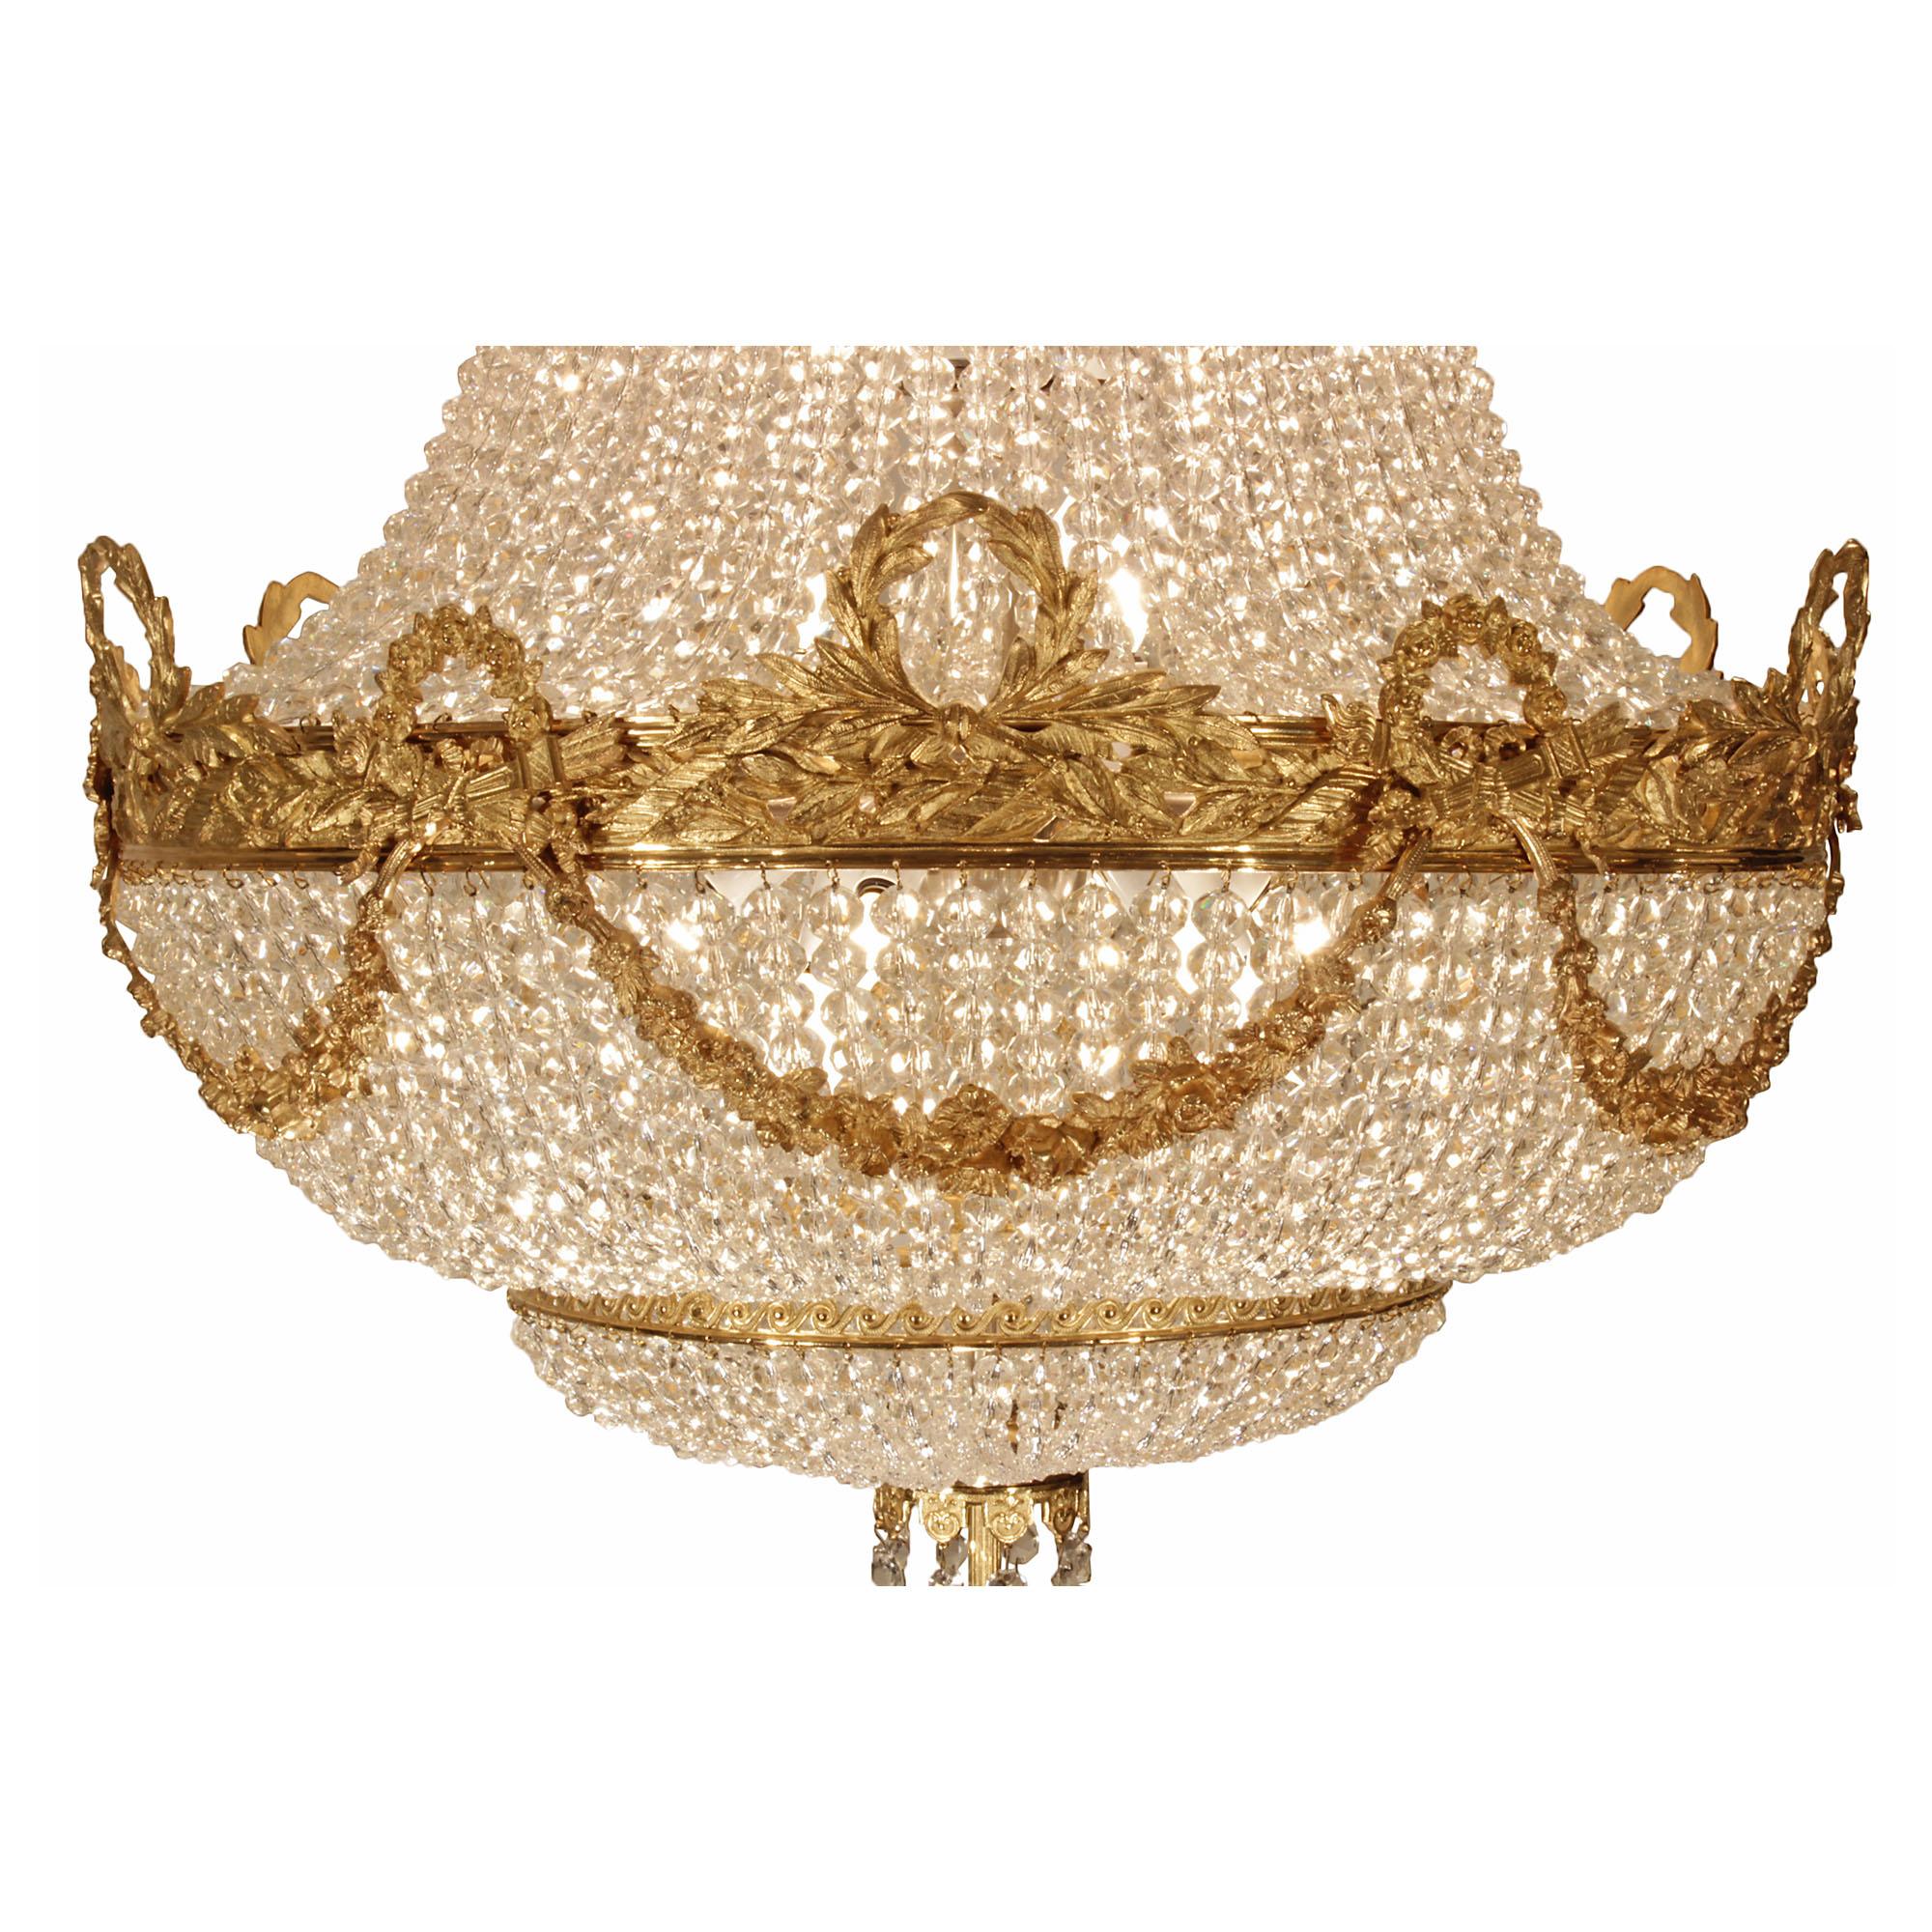 French Mid-19th Century Louis XVI Style Baccarat Crystal and Ormolu Chandelier In Good Condition For Sale In West Palm Beach, FL